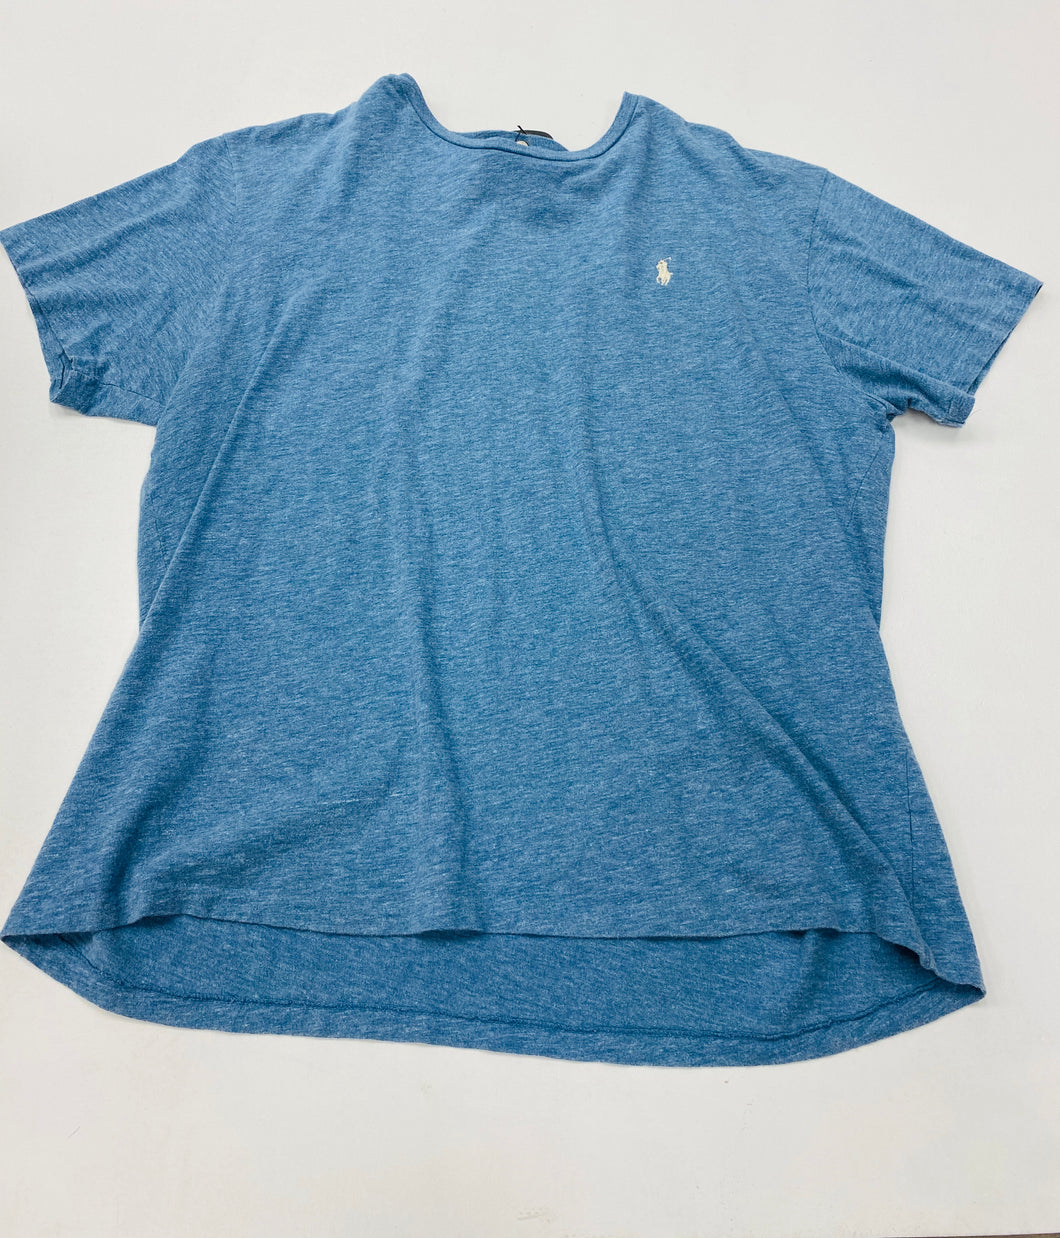 Polo (Ralph Lauren) Mens Short Sleeve Top Size Extra Large